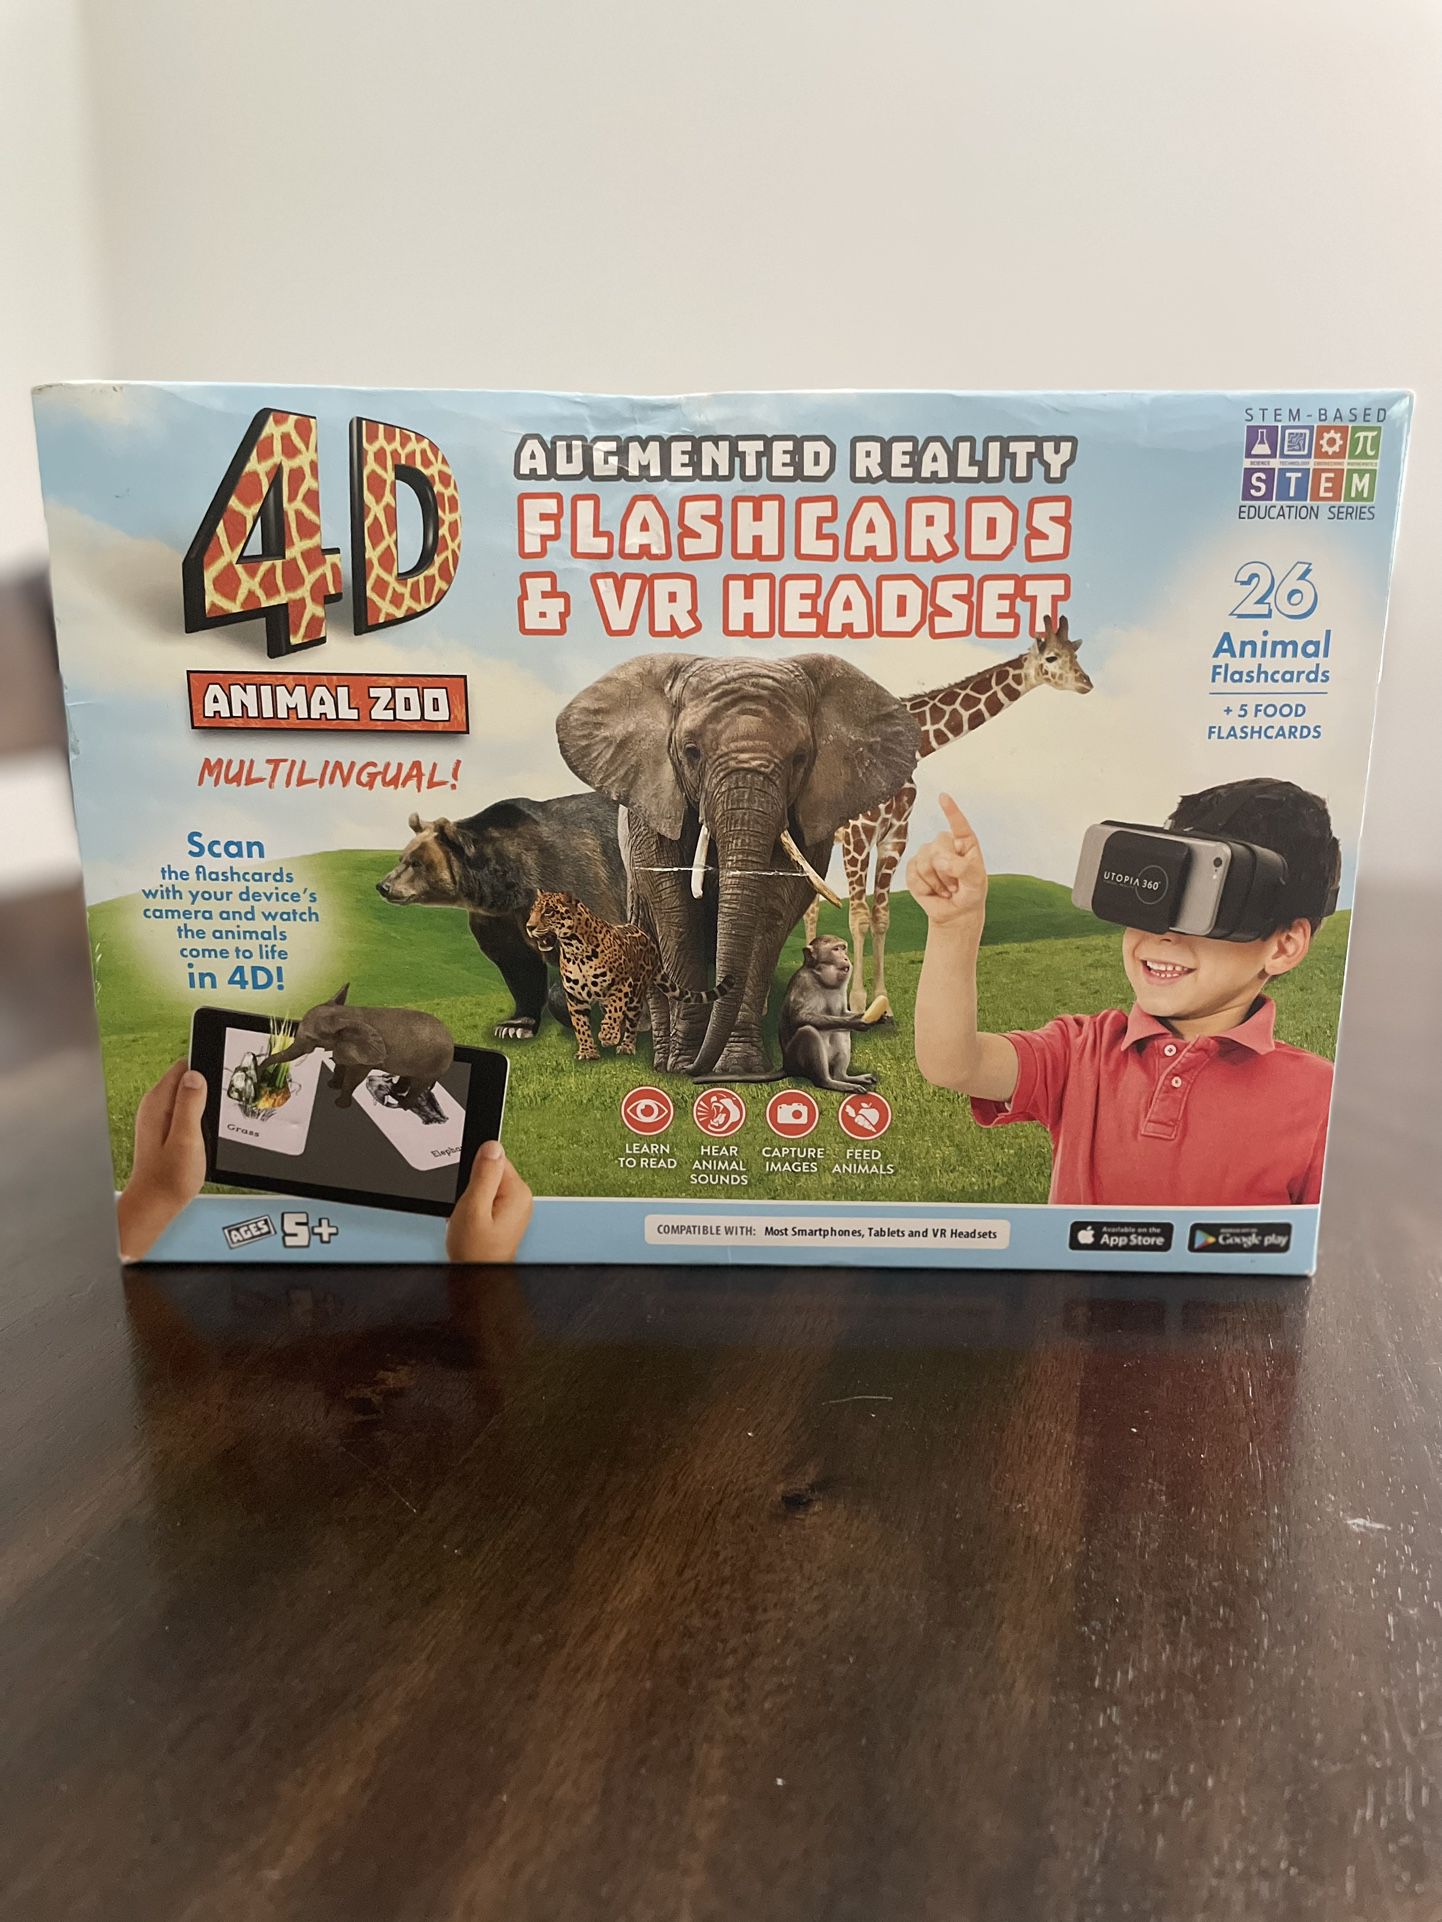 Brand New 4D Augmented Reality Flashcard & VR Headset Bundle with 26 Animal Flashcards 